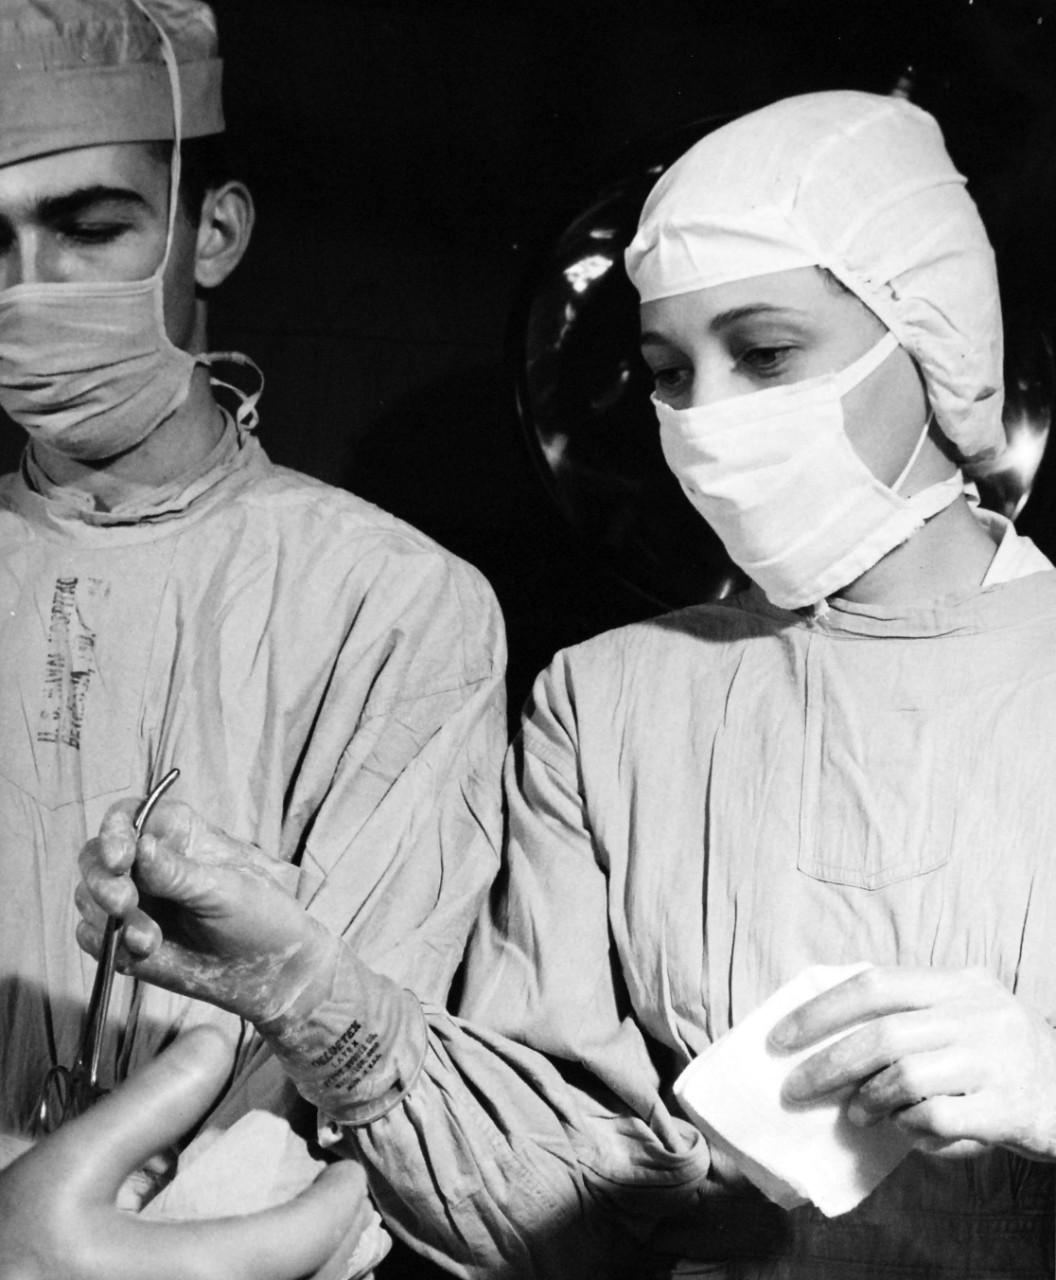 USN 709744:  U.S. Navy Nurse, Ensign Shirley W. Muse, NC, USNR, January 1957.   Muse passes instruments to a surgeon in the course of an operation at the U.S. Naval Hospital, Bethesda, Maryland.   Photograph released January 4, 1957.   Official U.S. Navy photograph, now in the collections of the National Archives.   